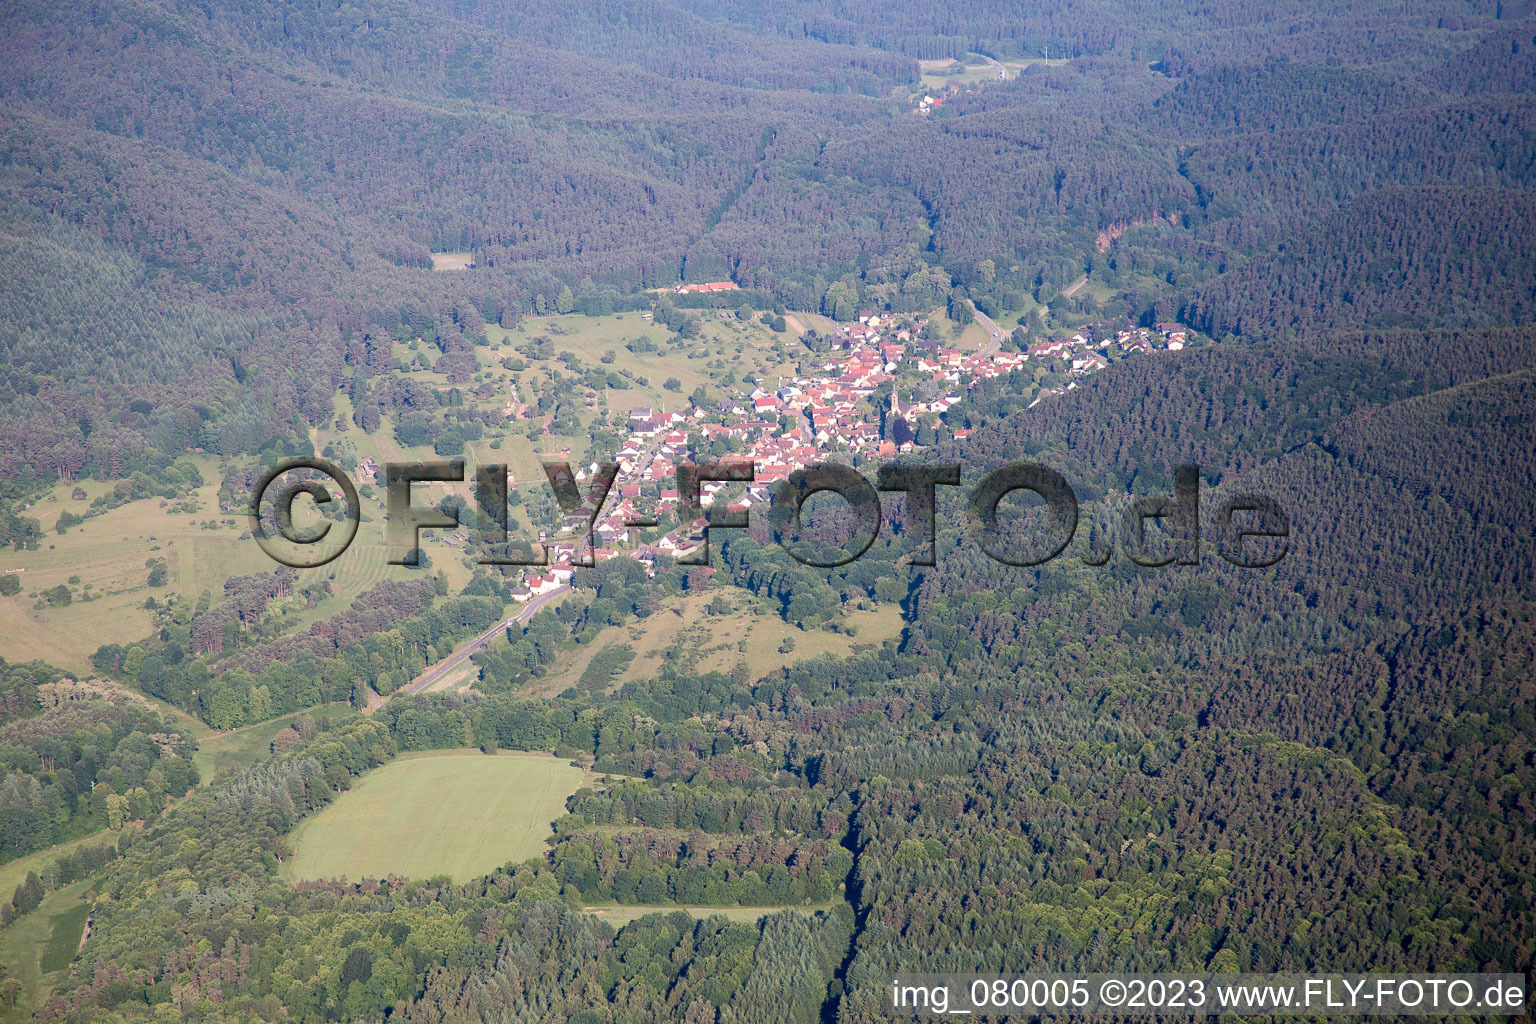 Aerial photograpy of Birkenhördt in the state Rhineland-Palatinate, Germany